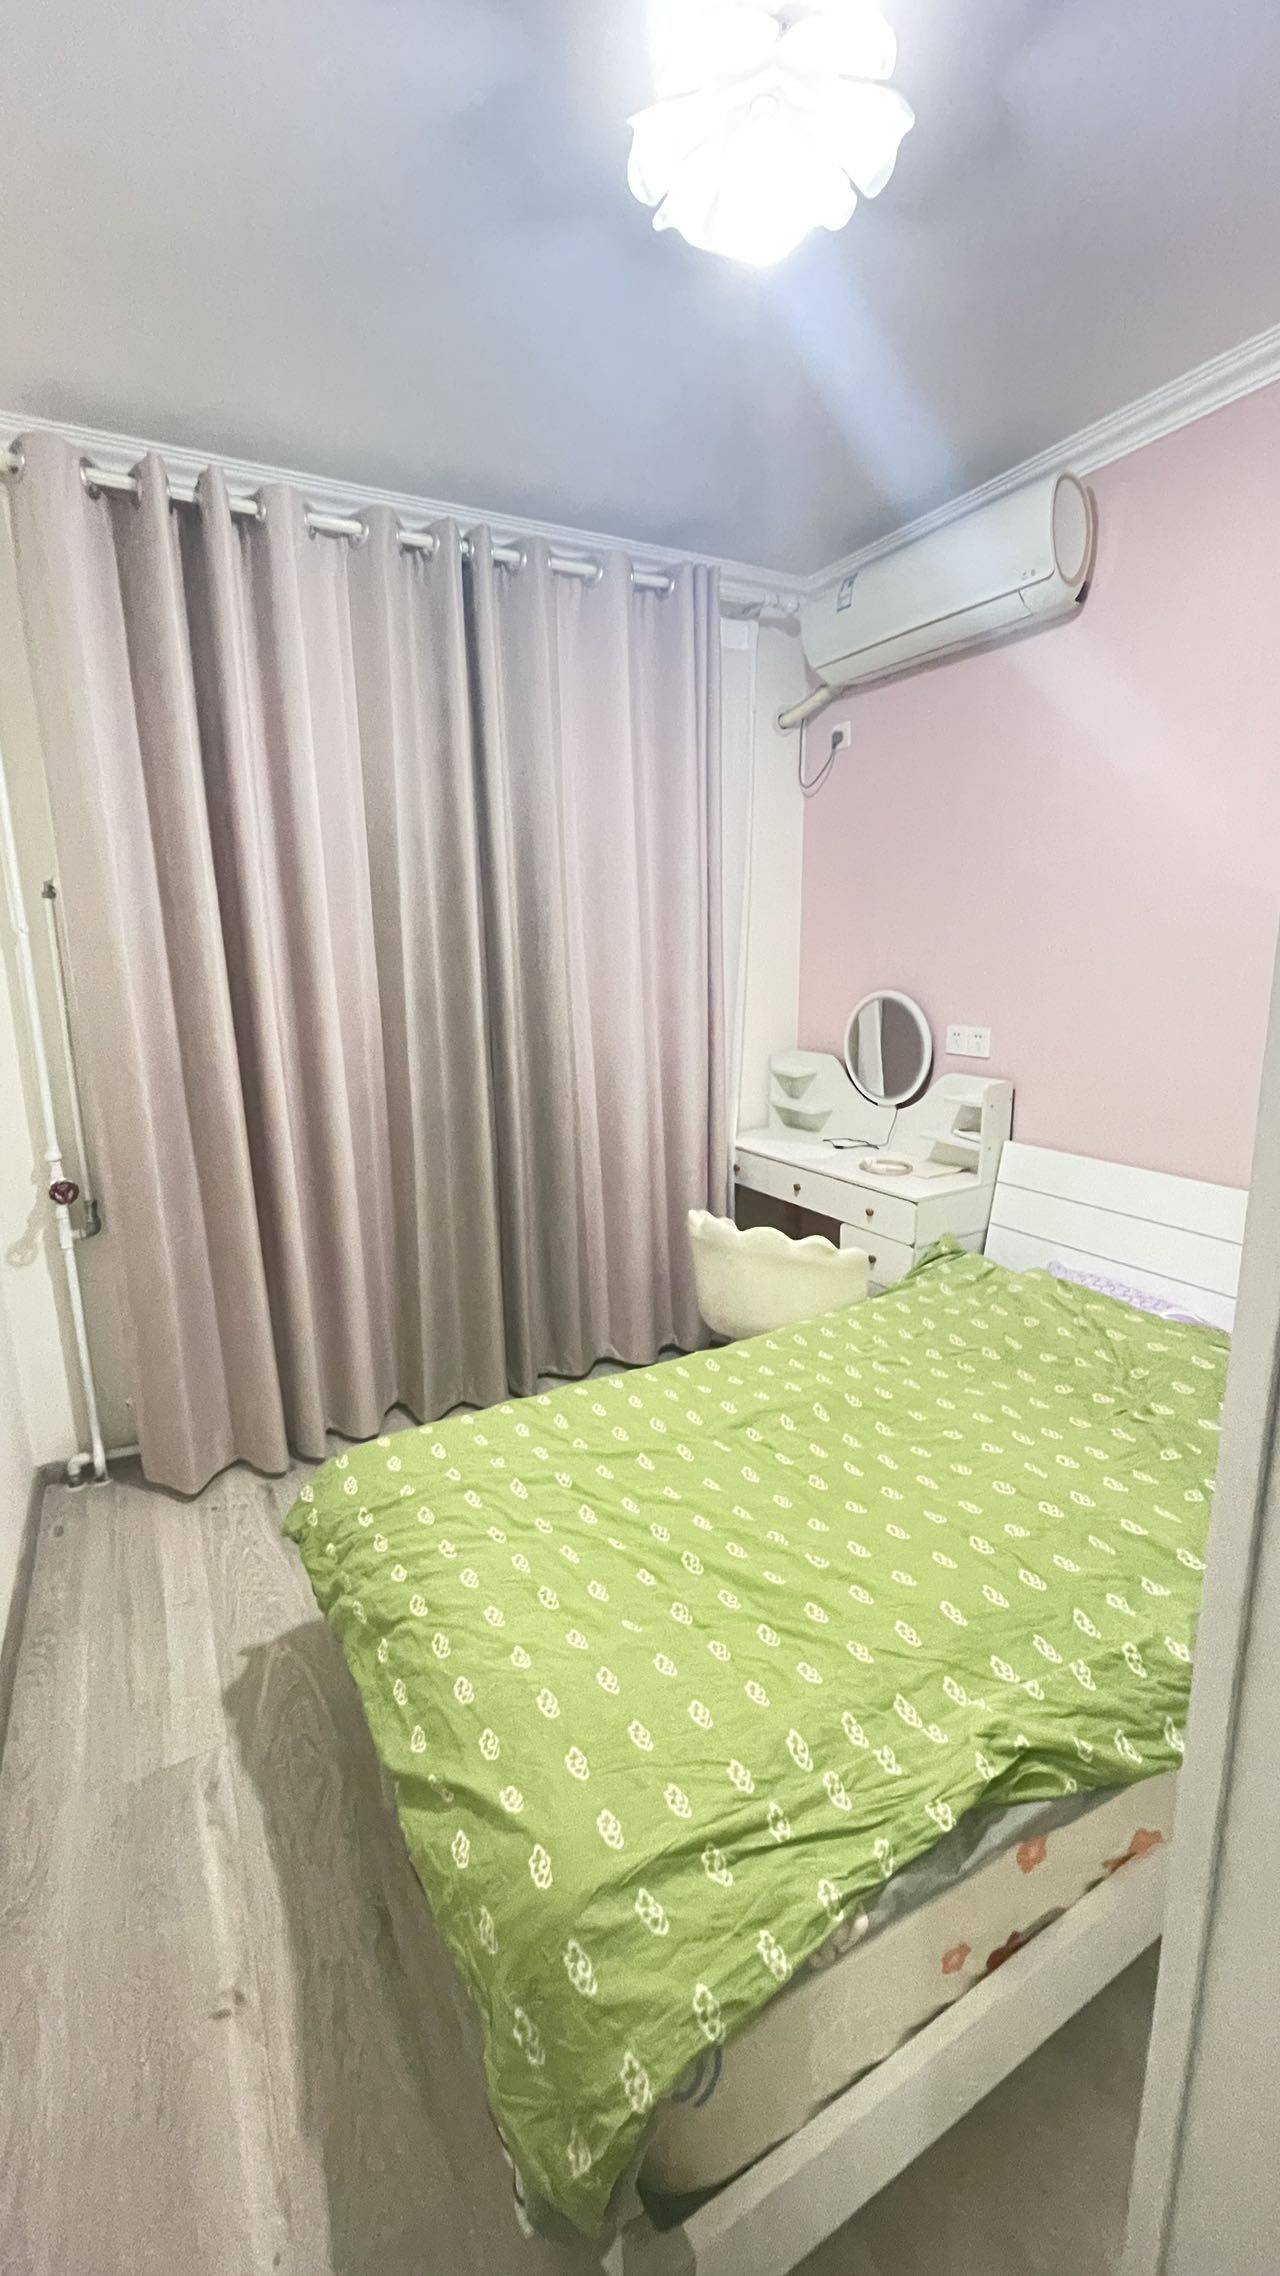 Beijing-Haidian-北安河地铁站,LGBTQ Friendly,Cozy Home,Clean&Comfy,No Gender Limit,Chilled